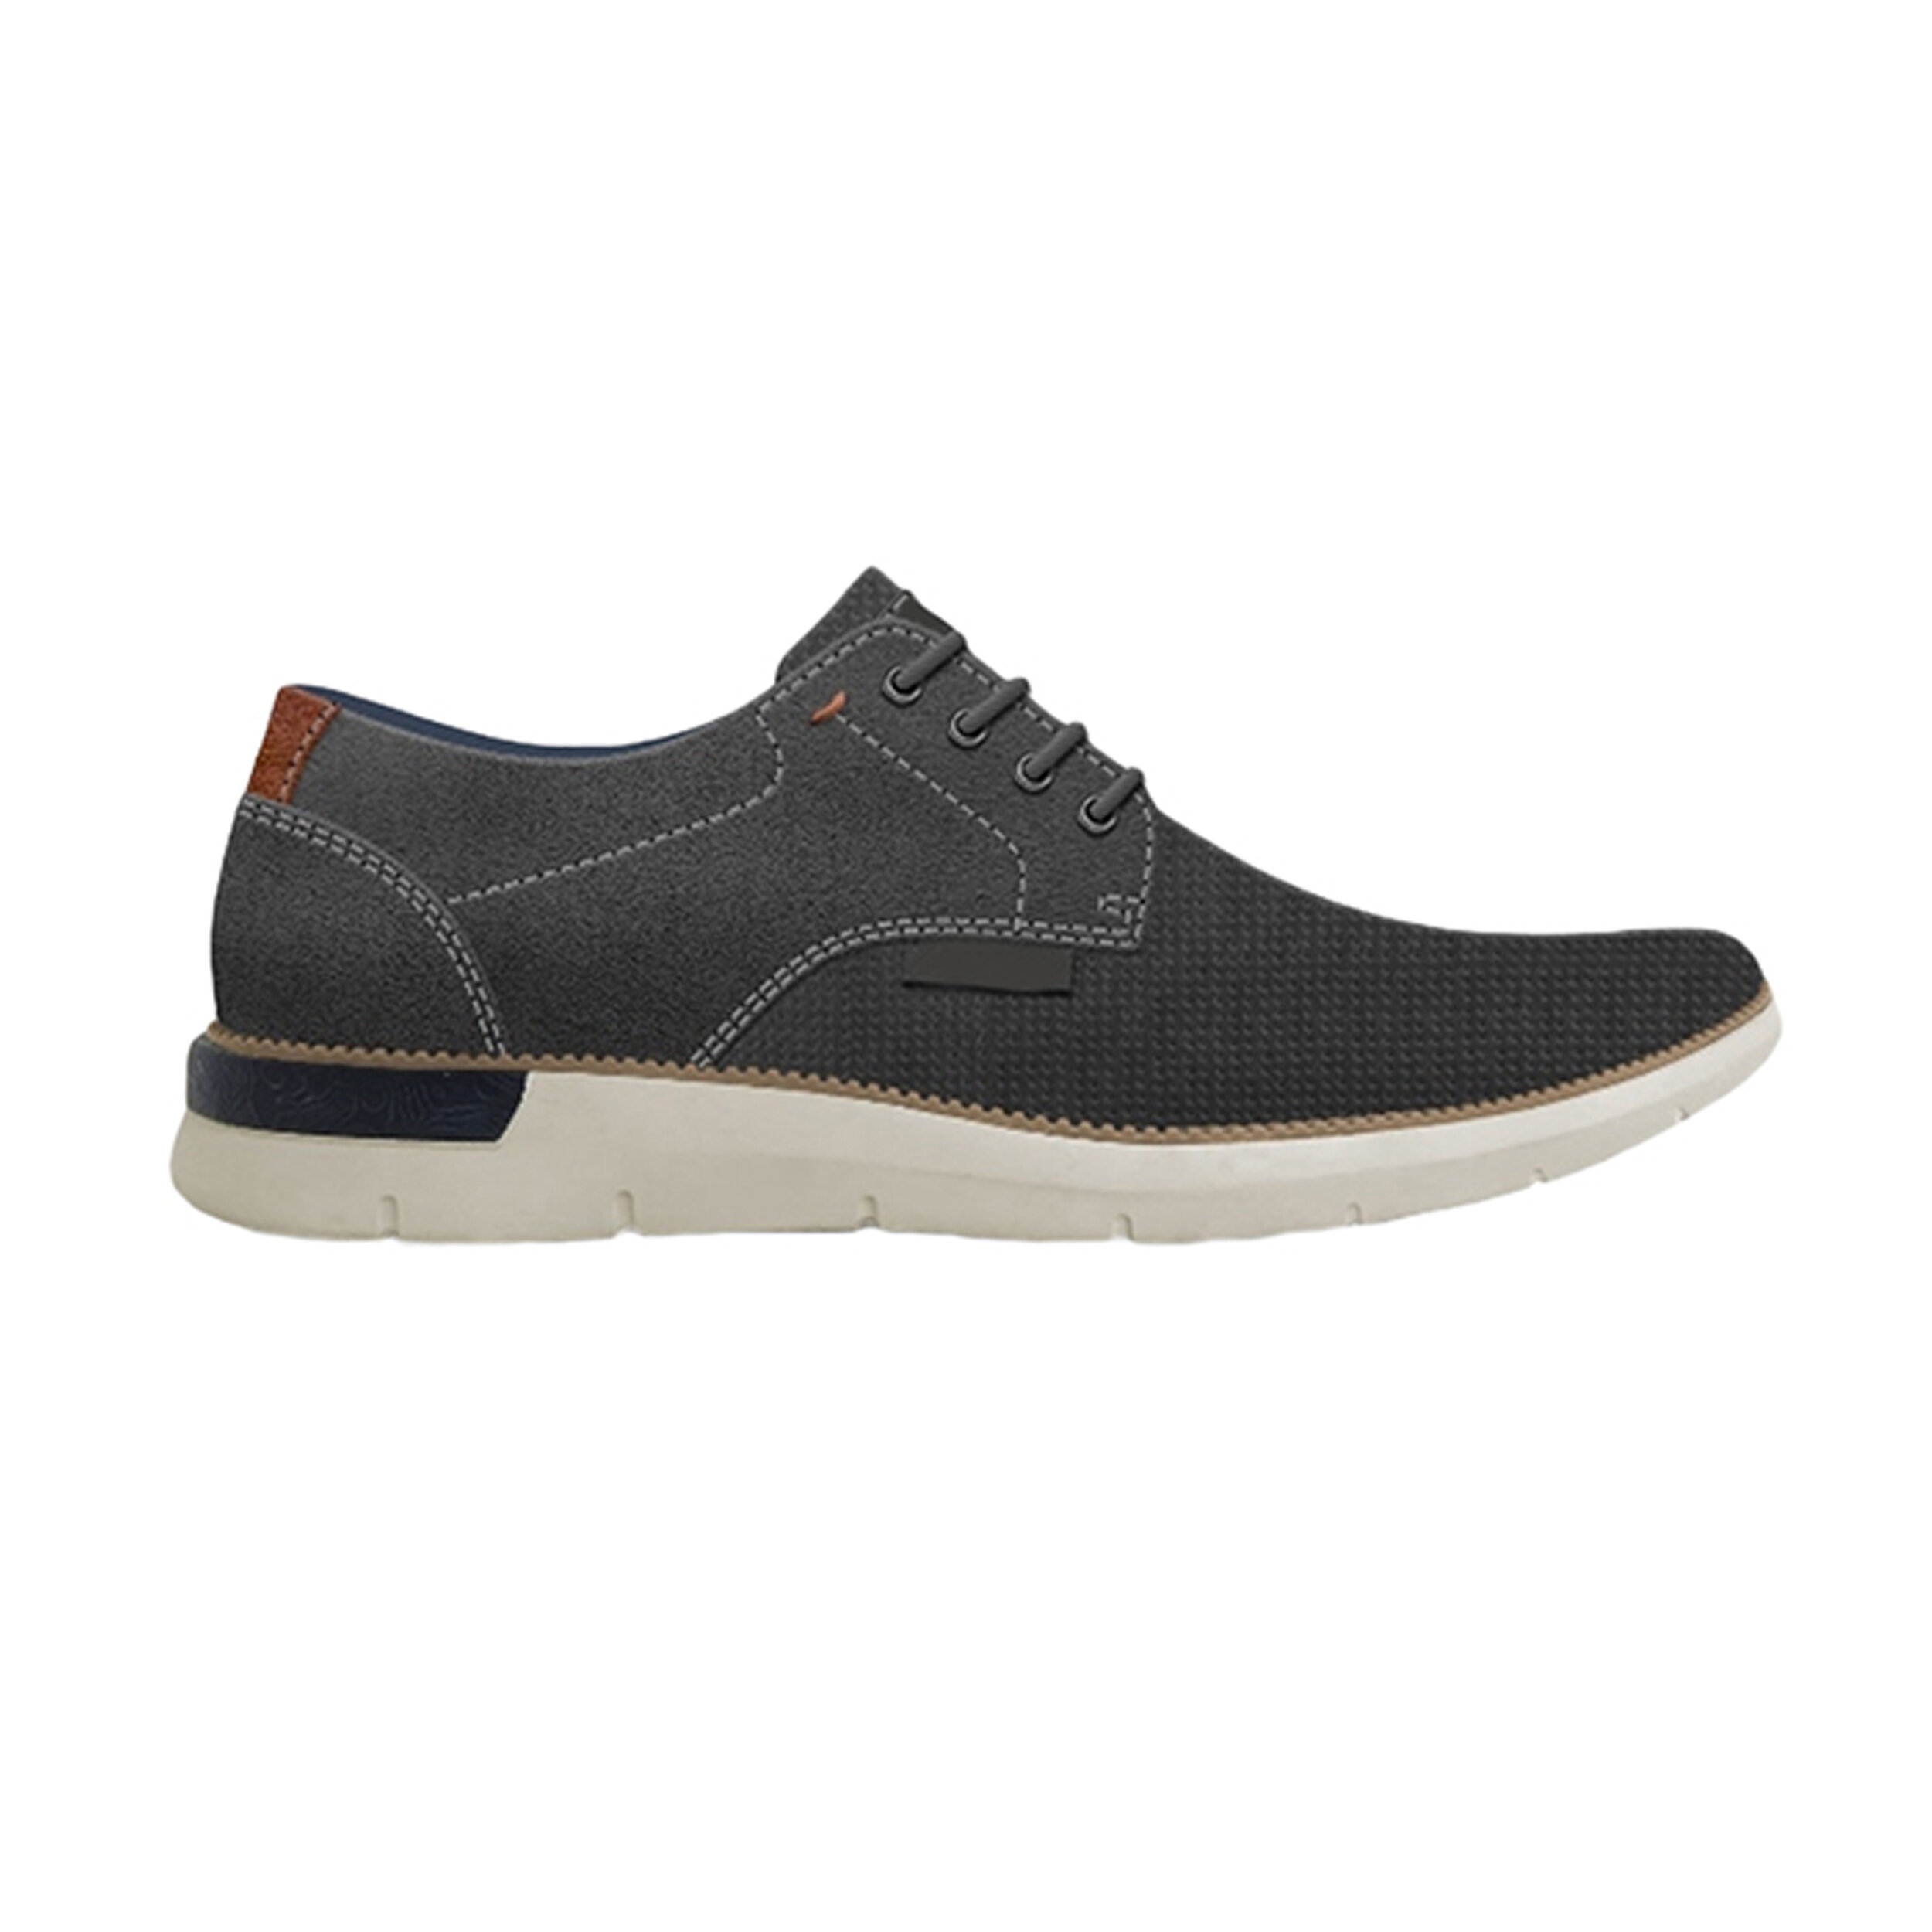  Men's Gary Sport Casual, Payless Shoesource P1,950 